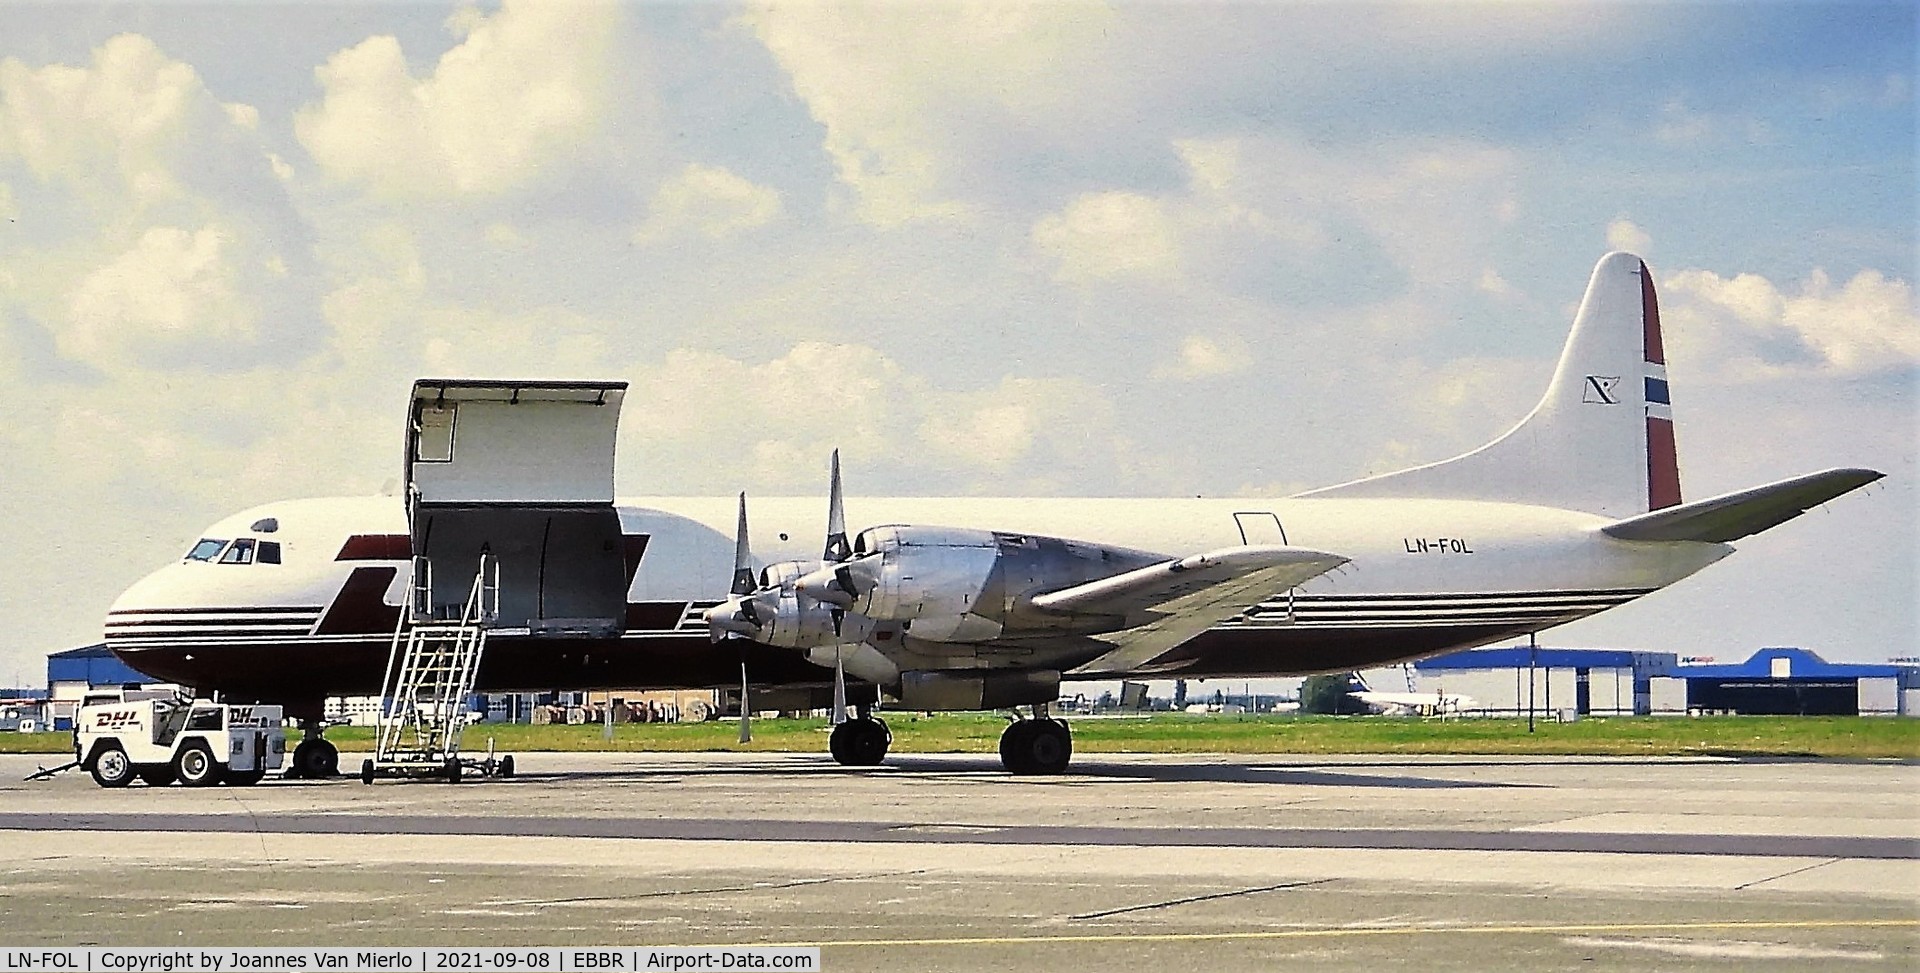 LN-FOL, 1960 Lockheed L-188A(F) Electra C/N 1116, Flying parcels out of Bussels'90s Slide scan